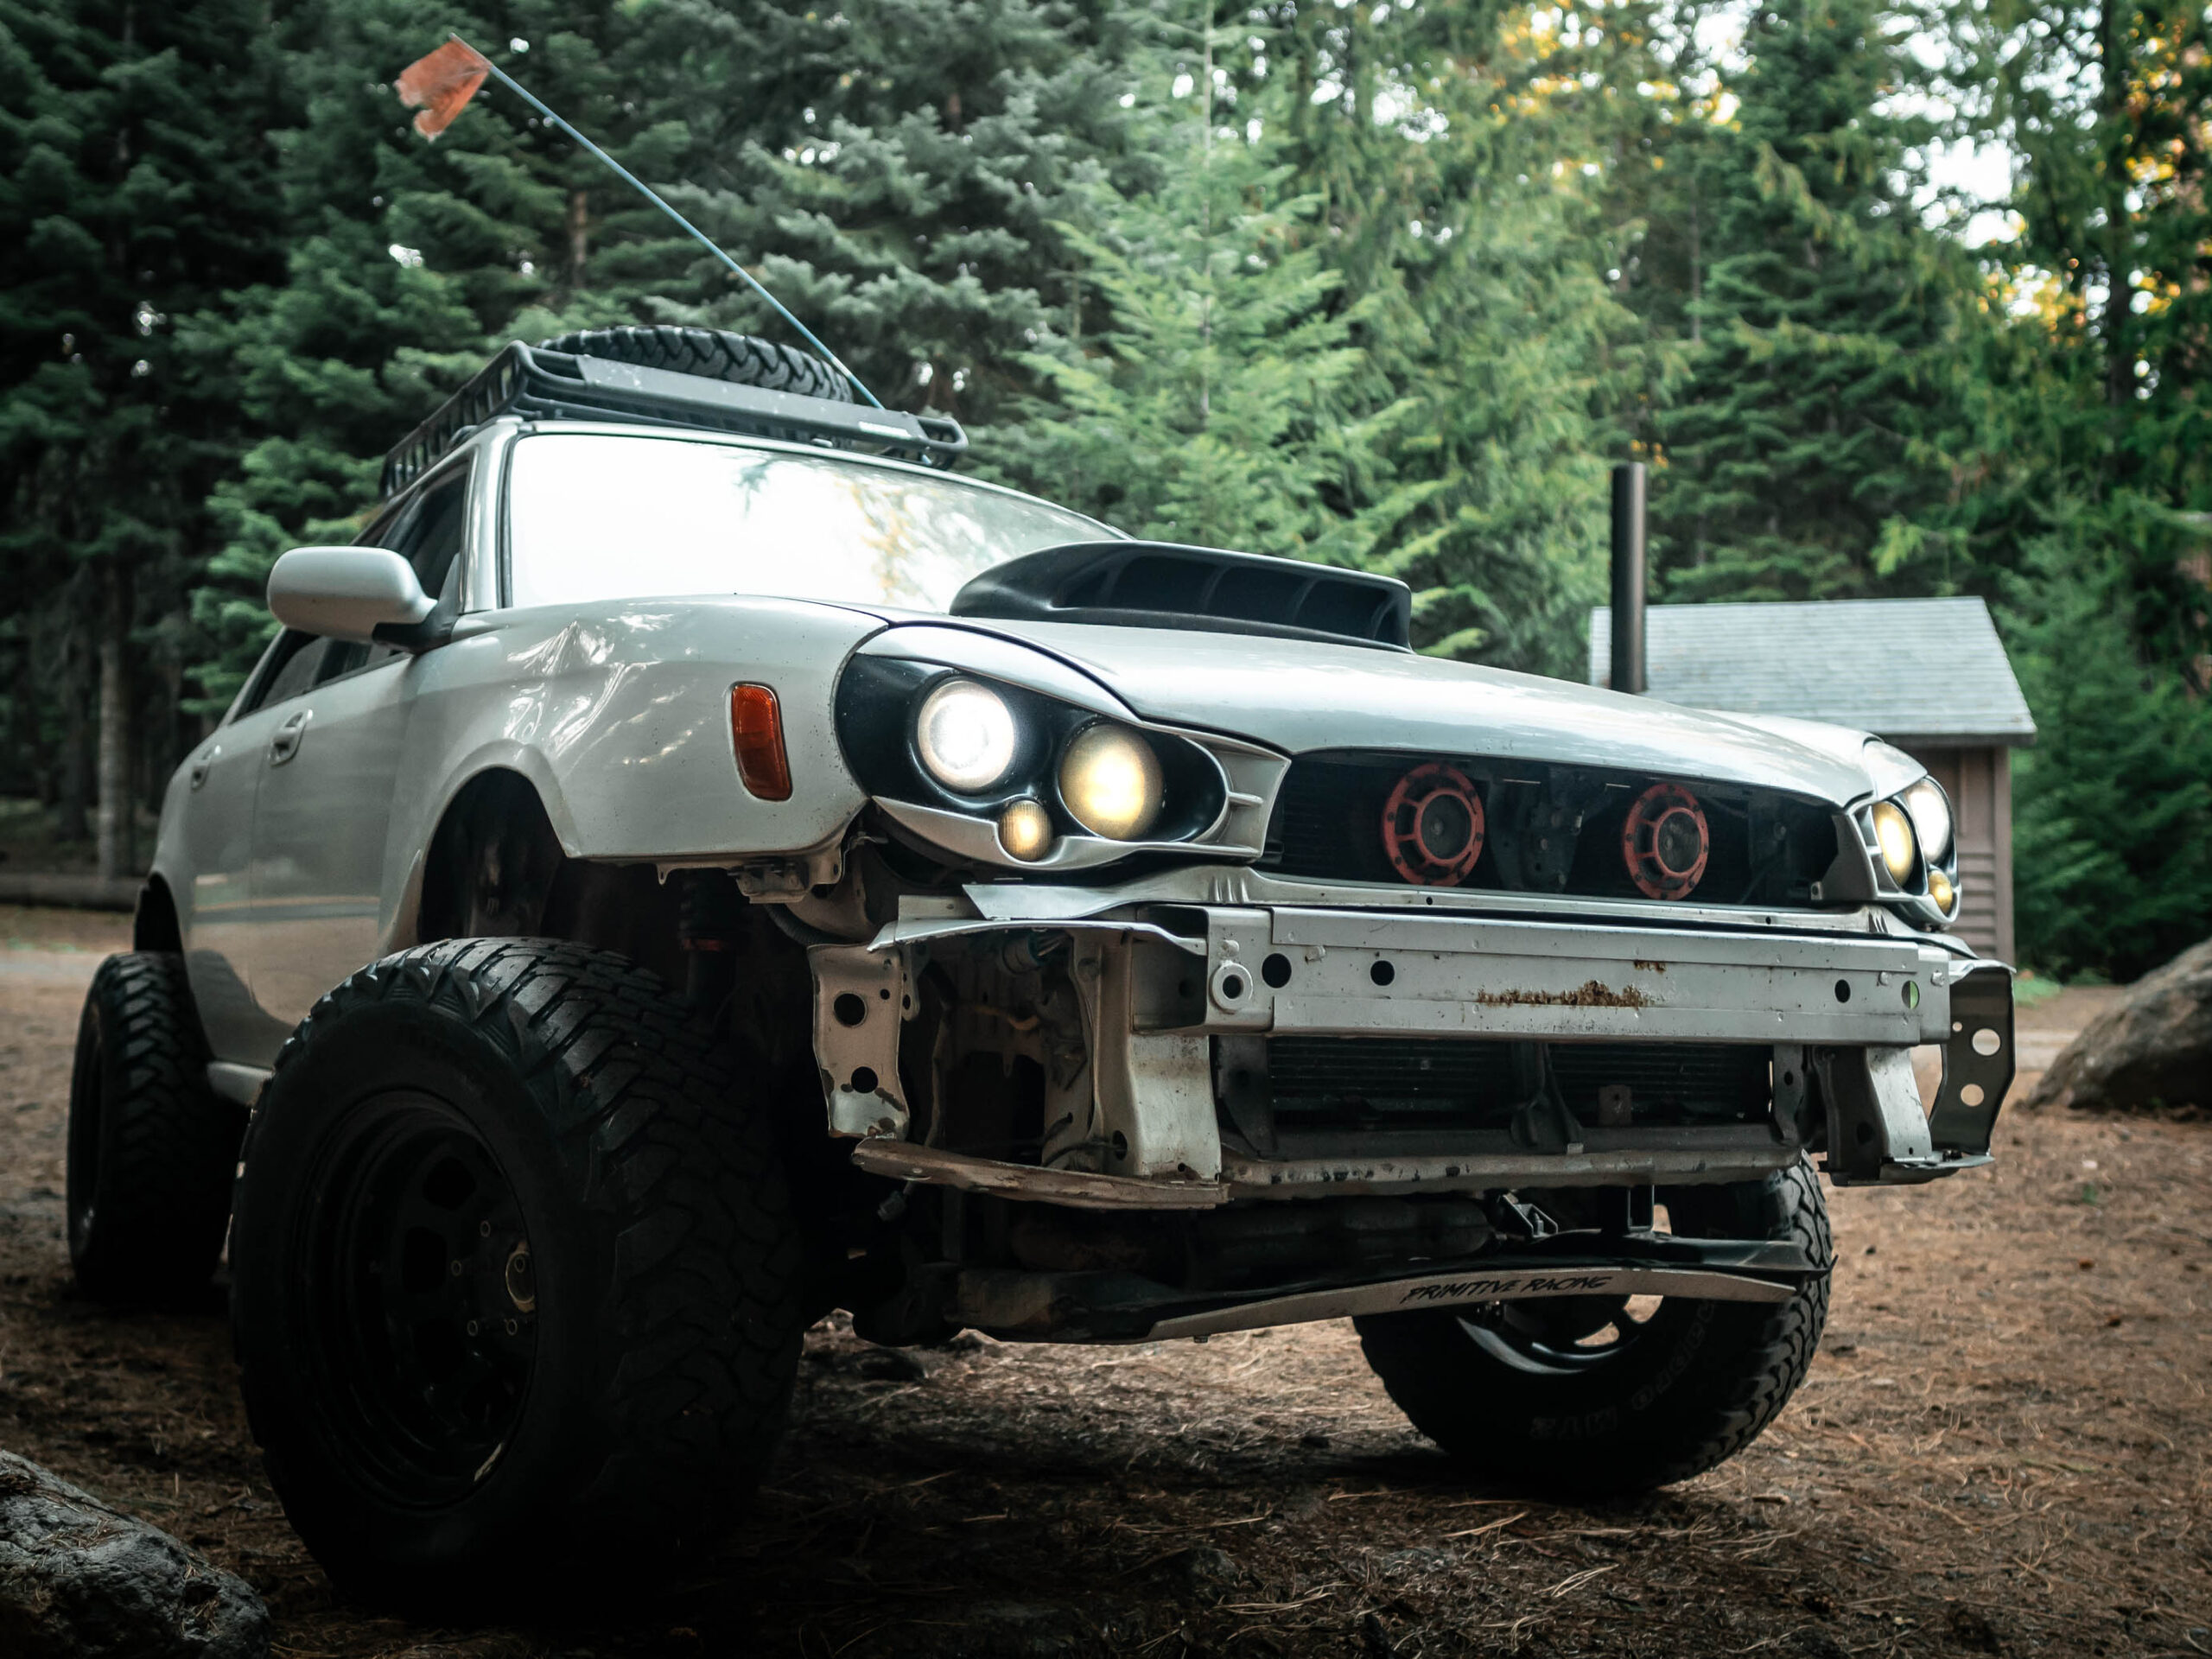 lifted subaru wrx offroad in the forest with Morette headlights